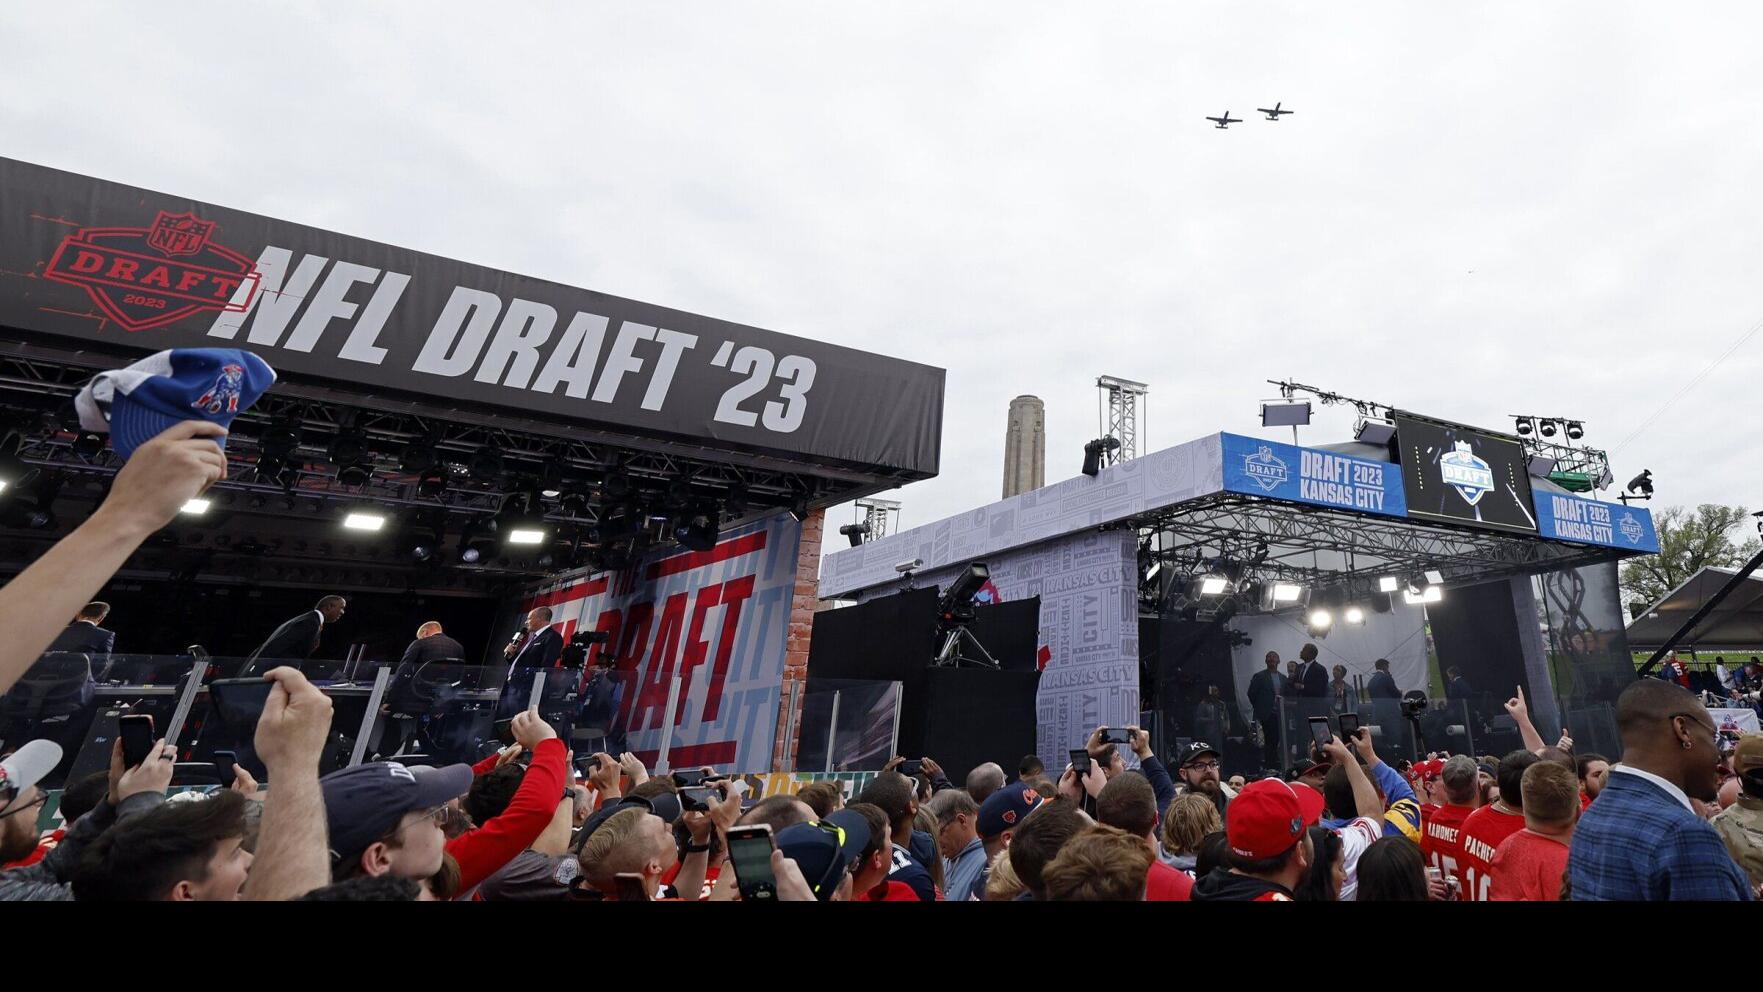 NFL Draft Kansas City: What fans need to know in 2023